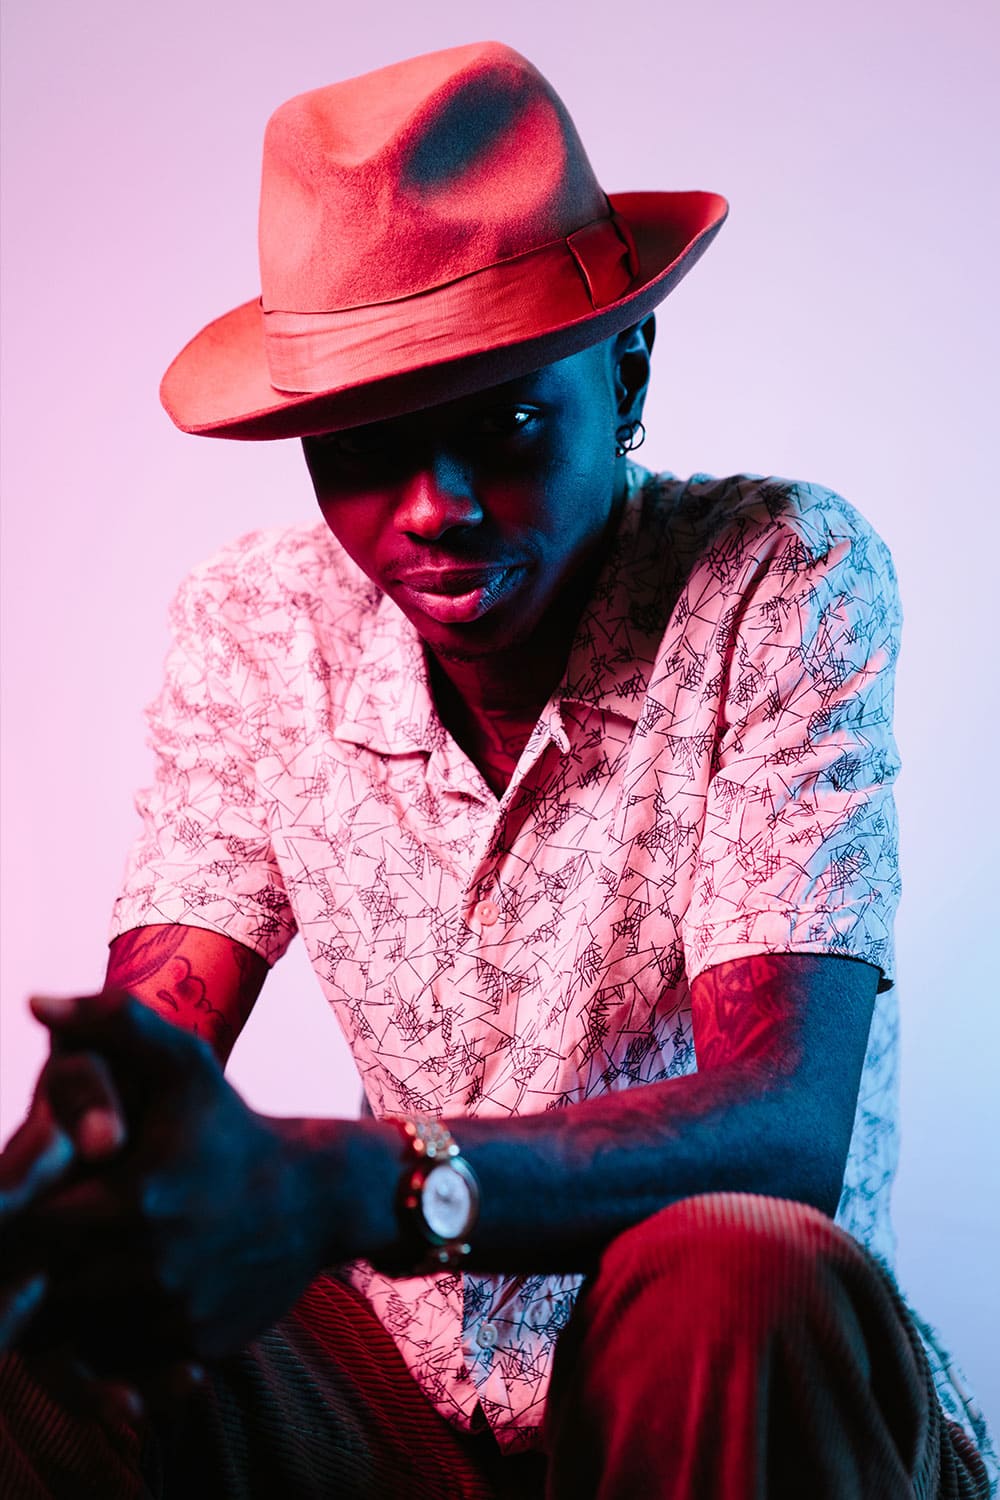 Strongly lit portrait of an elegant tattooed black man in short sleeved shirt and hat